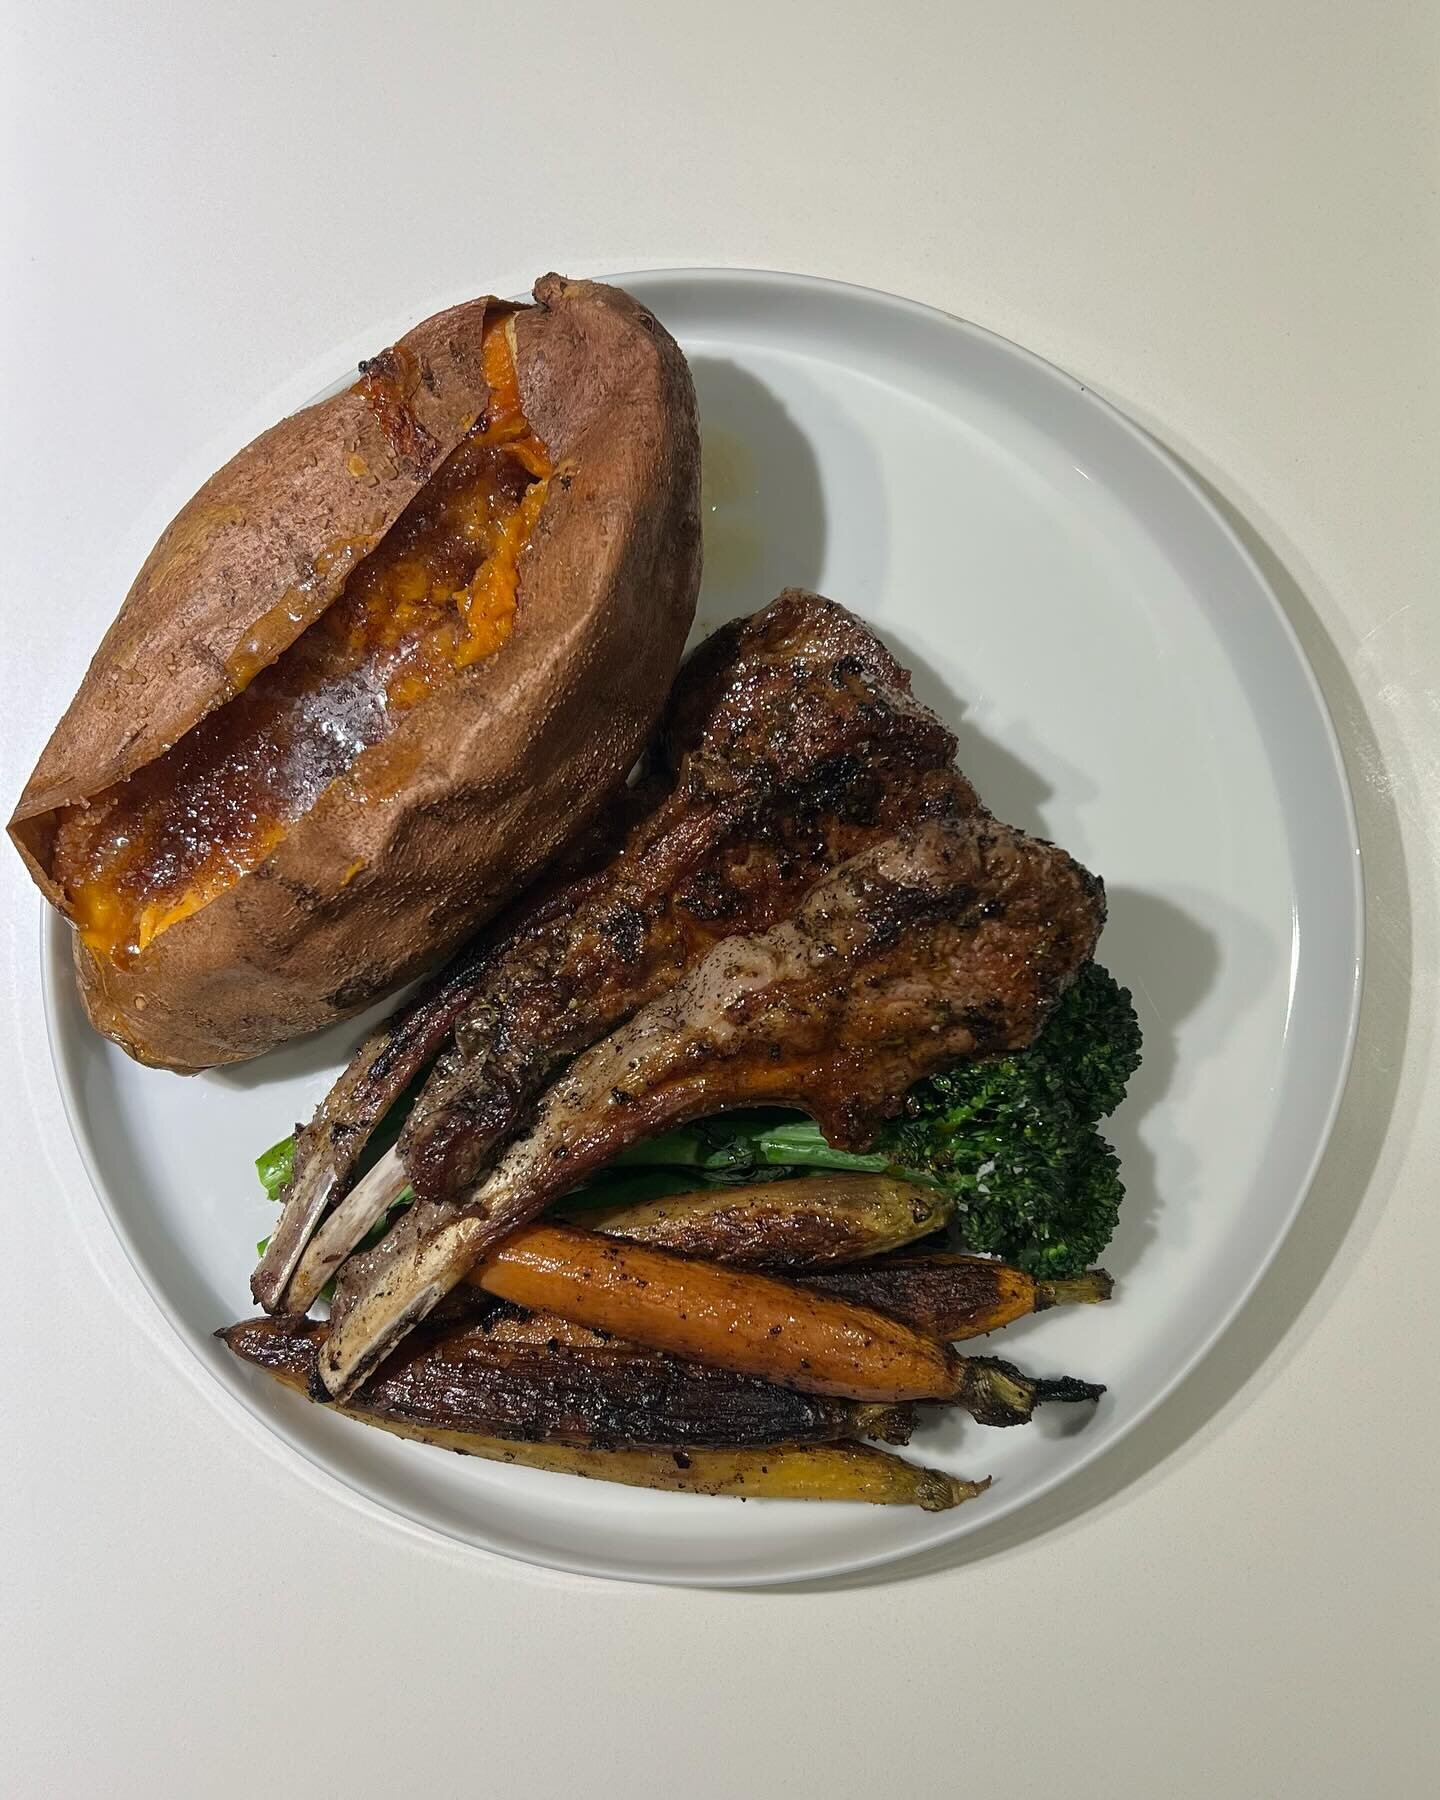 very simple grown ass meal. when i east like this i know i&rsquo;m an adult. grilling the lamb chops, carrots and broccolini in the same cast iron skillet was my best decision that day. we love a single pan meal. i&rsquo;ll post a loaded sweet potato